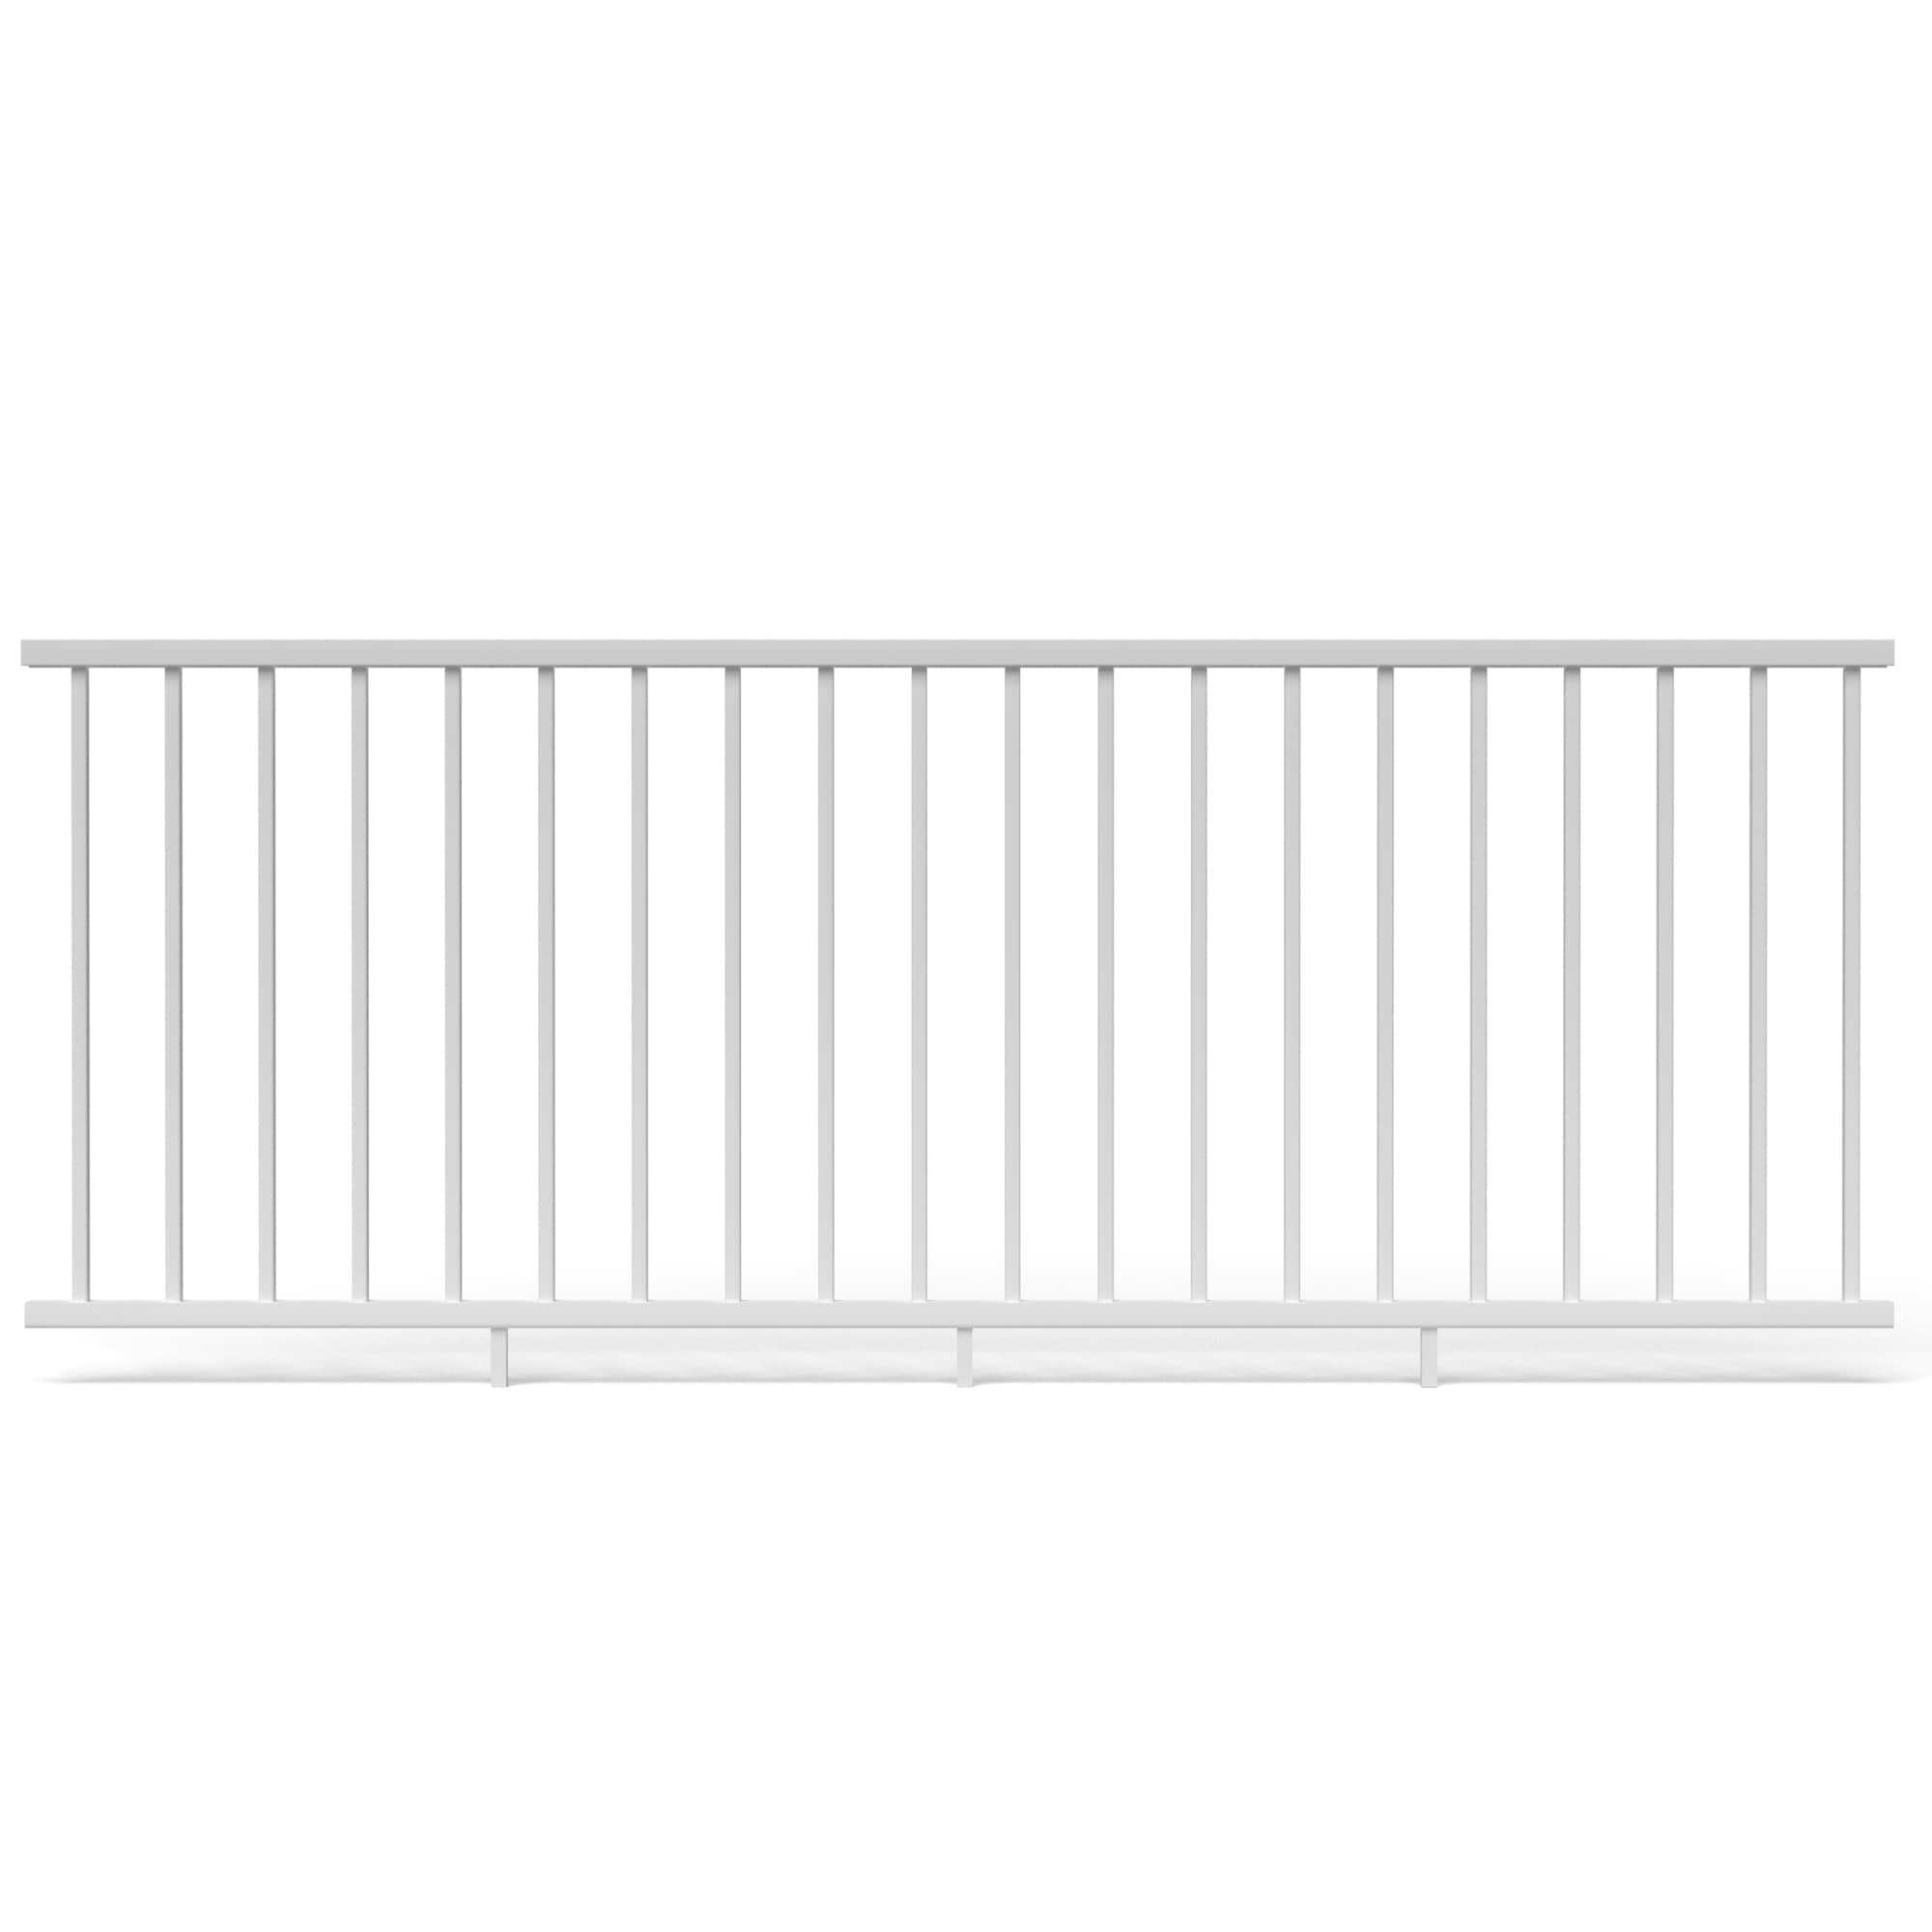 2 Inch Wide Aluminum Deck Railing Systems at Lowes.com